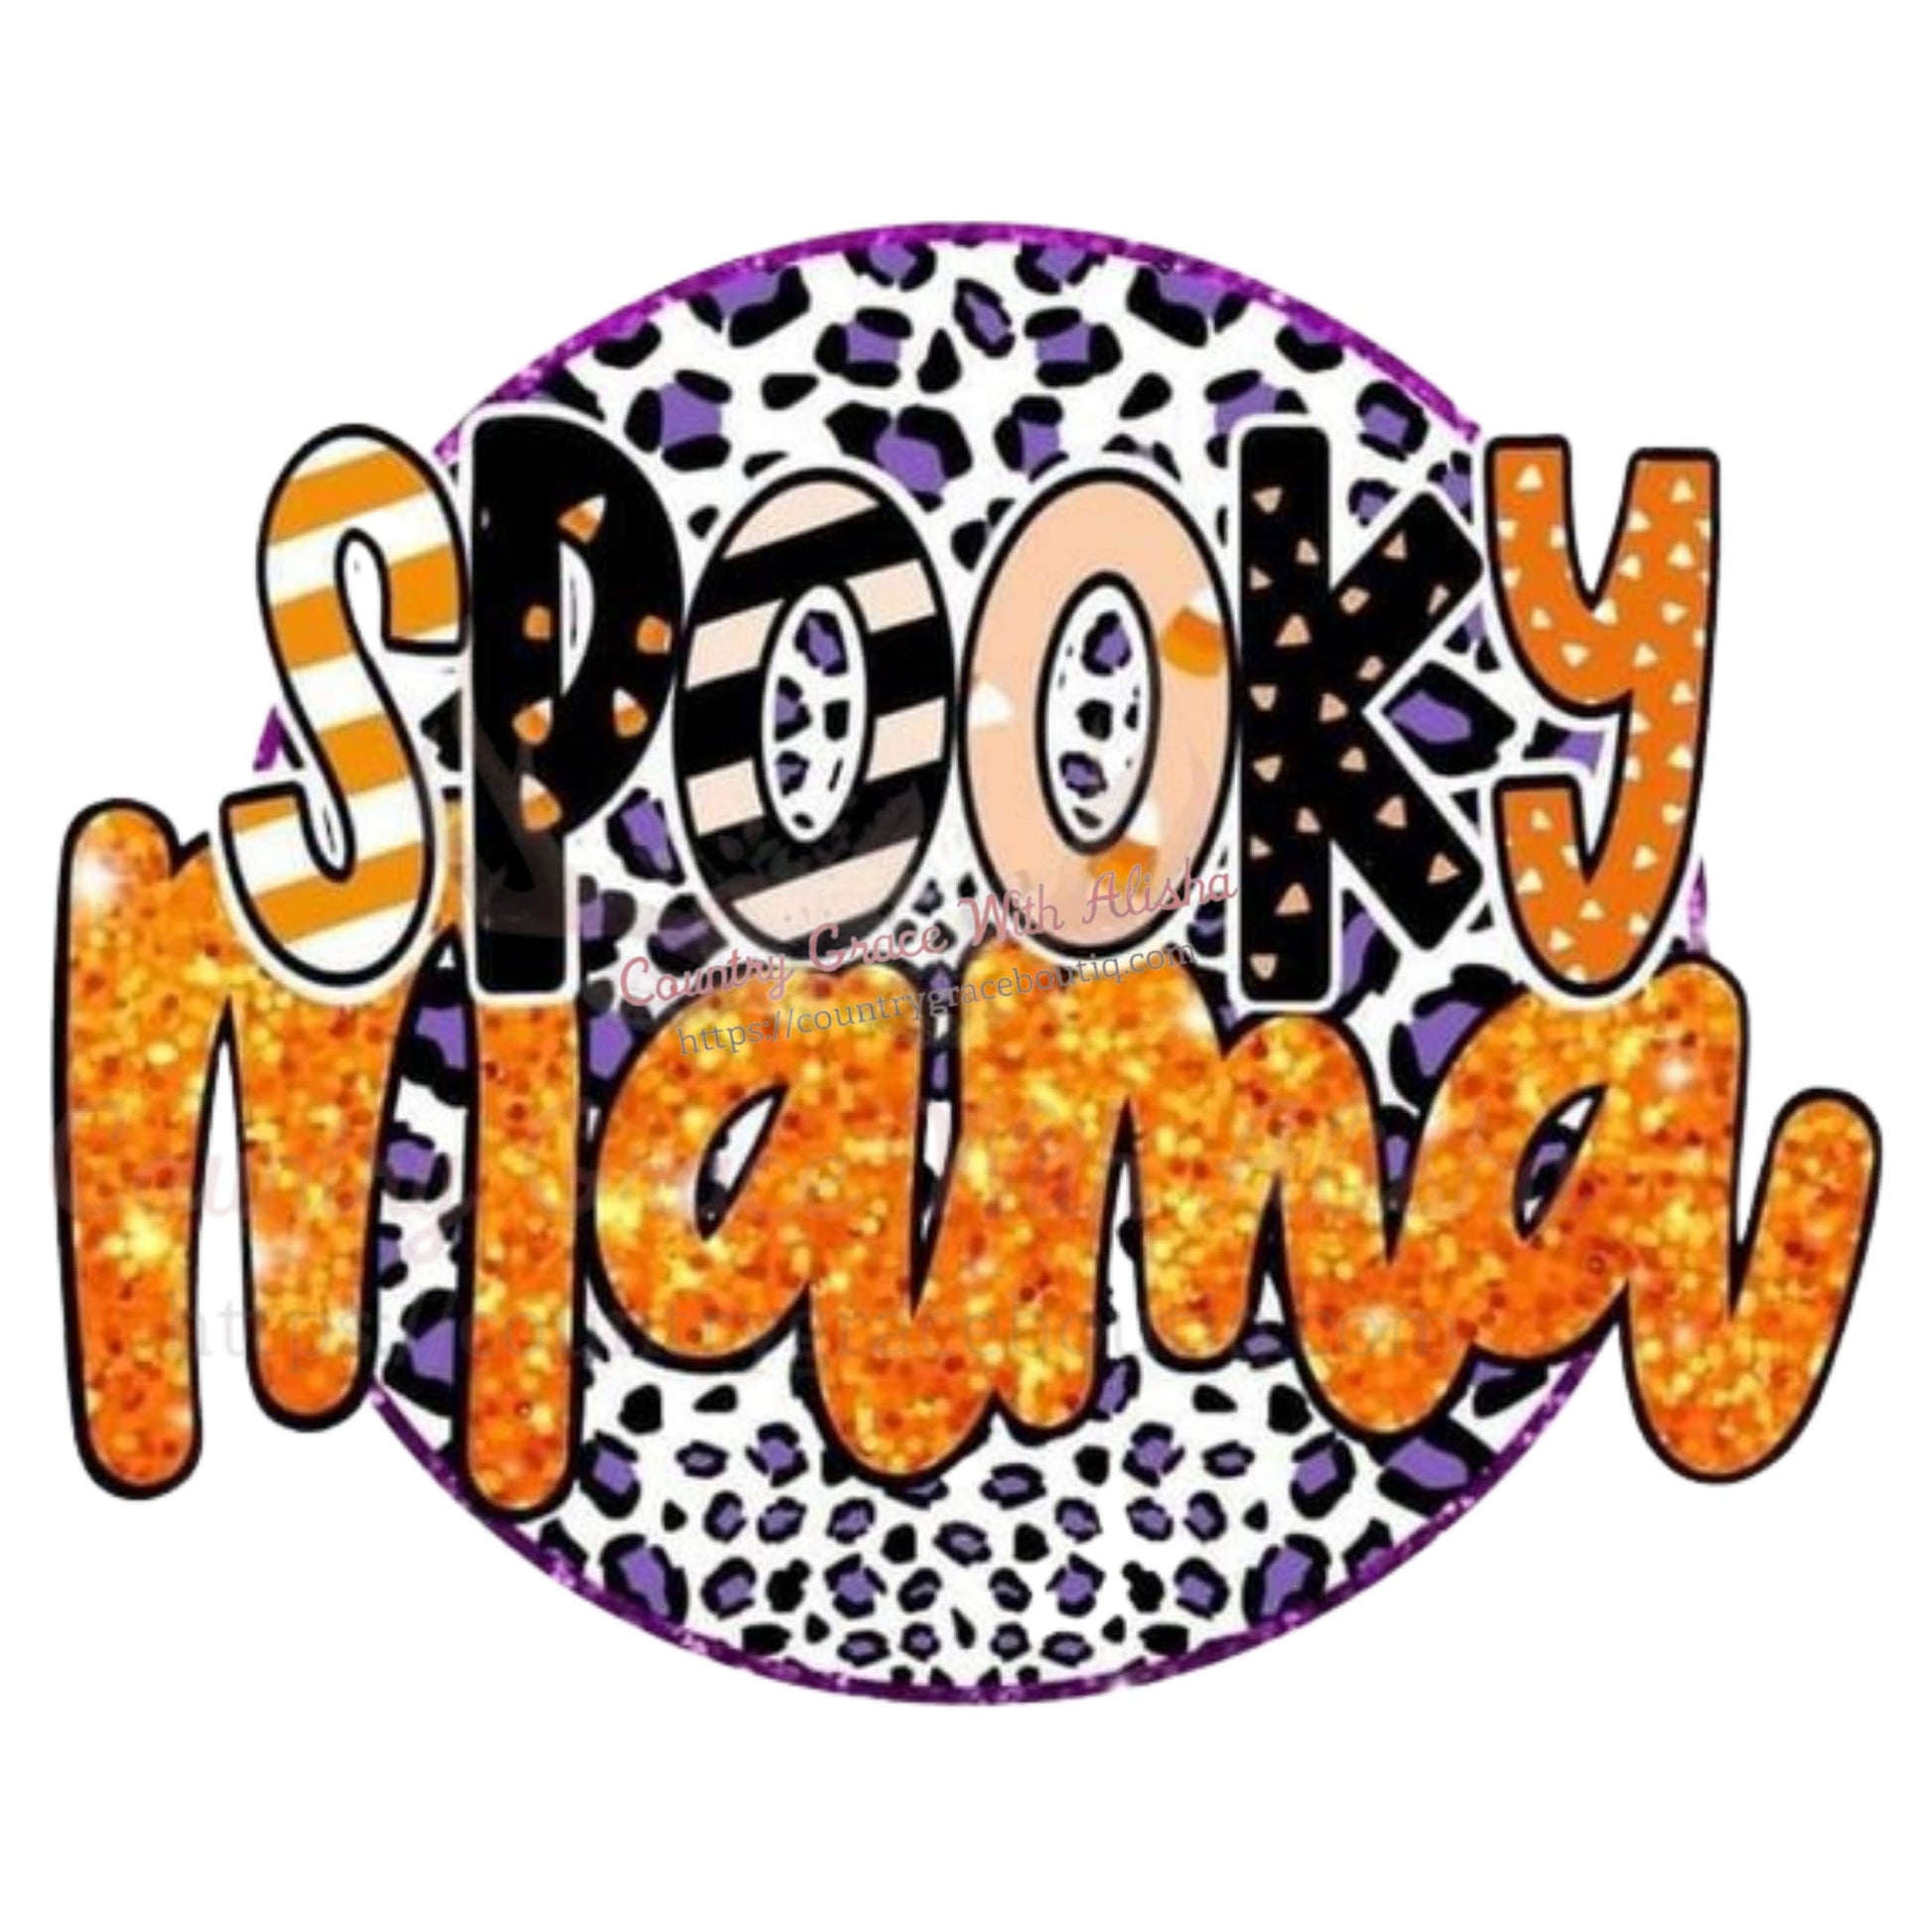 Spooky Mama Sublimation Transfer - Sub $1.50 Country Grace 